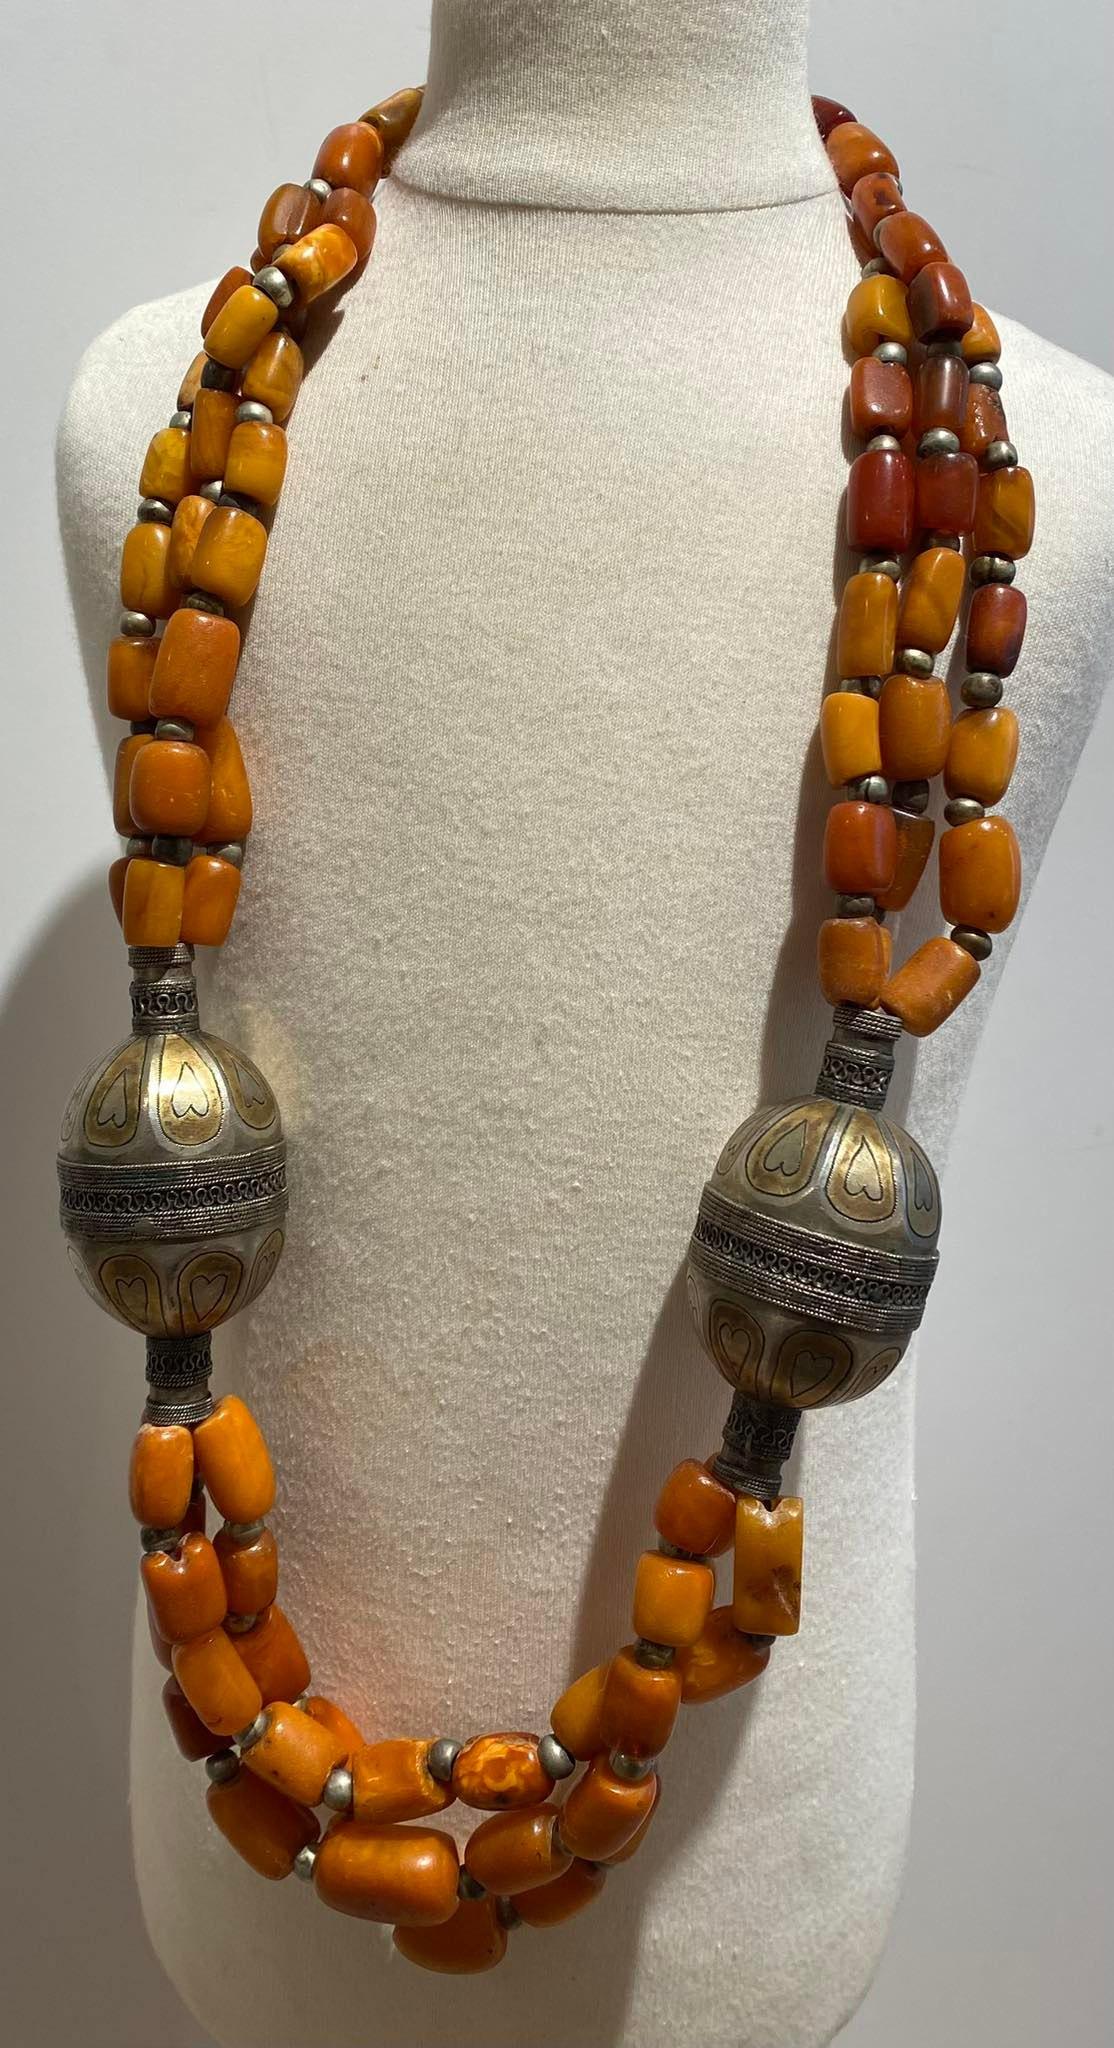  Antique Amber Necklace Yemen Afghanistan 18/19th Century Islamic Art silver  For Sale 10